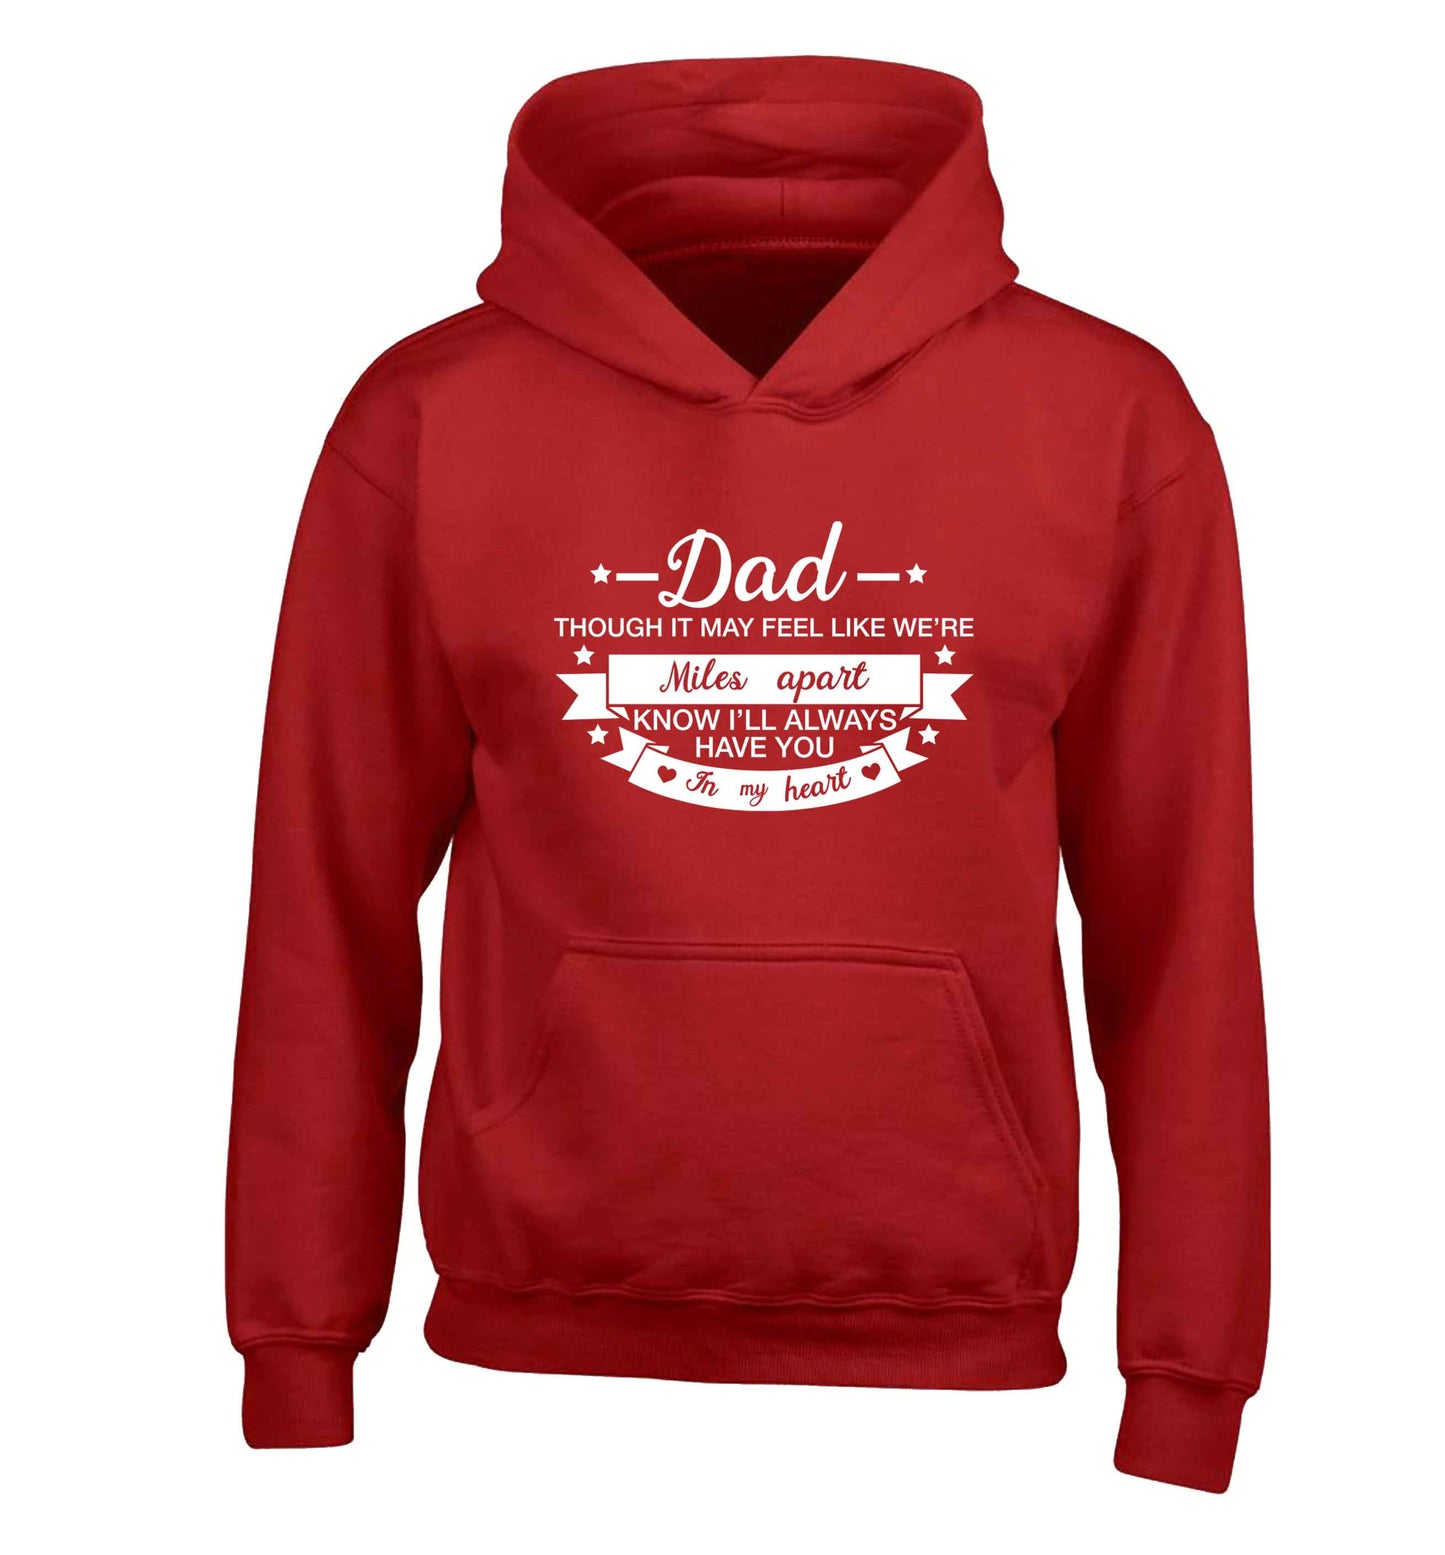 Dad though it may feel like we're miles apart know I'll always have you in my heart children's red hoodie 12-13 Years